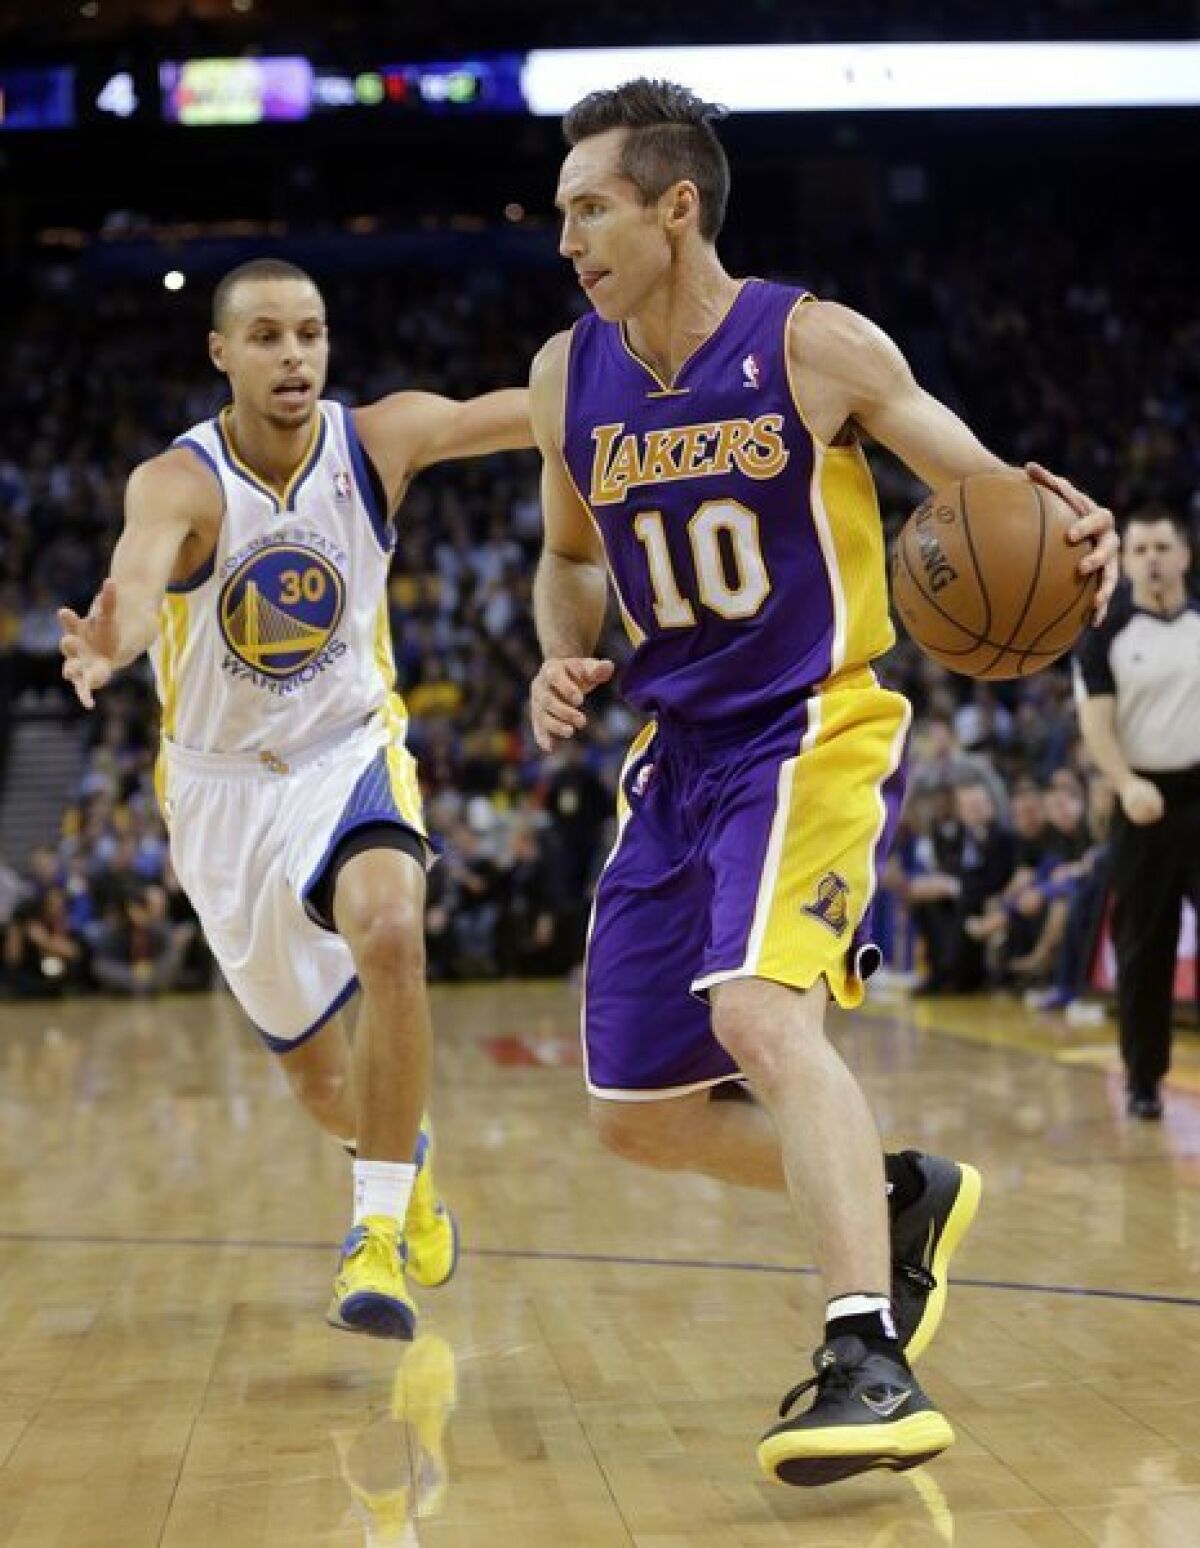 Steve Nash dribbles past the Golden State Warriors' Stephen Curry during a game in Oakland.